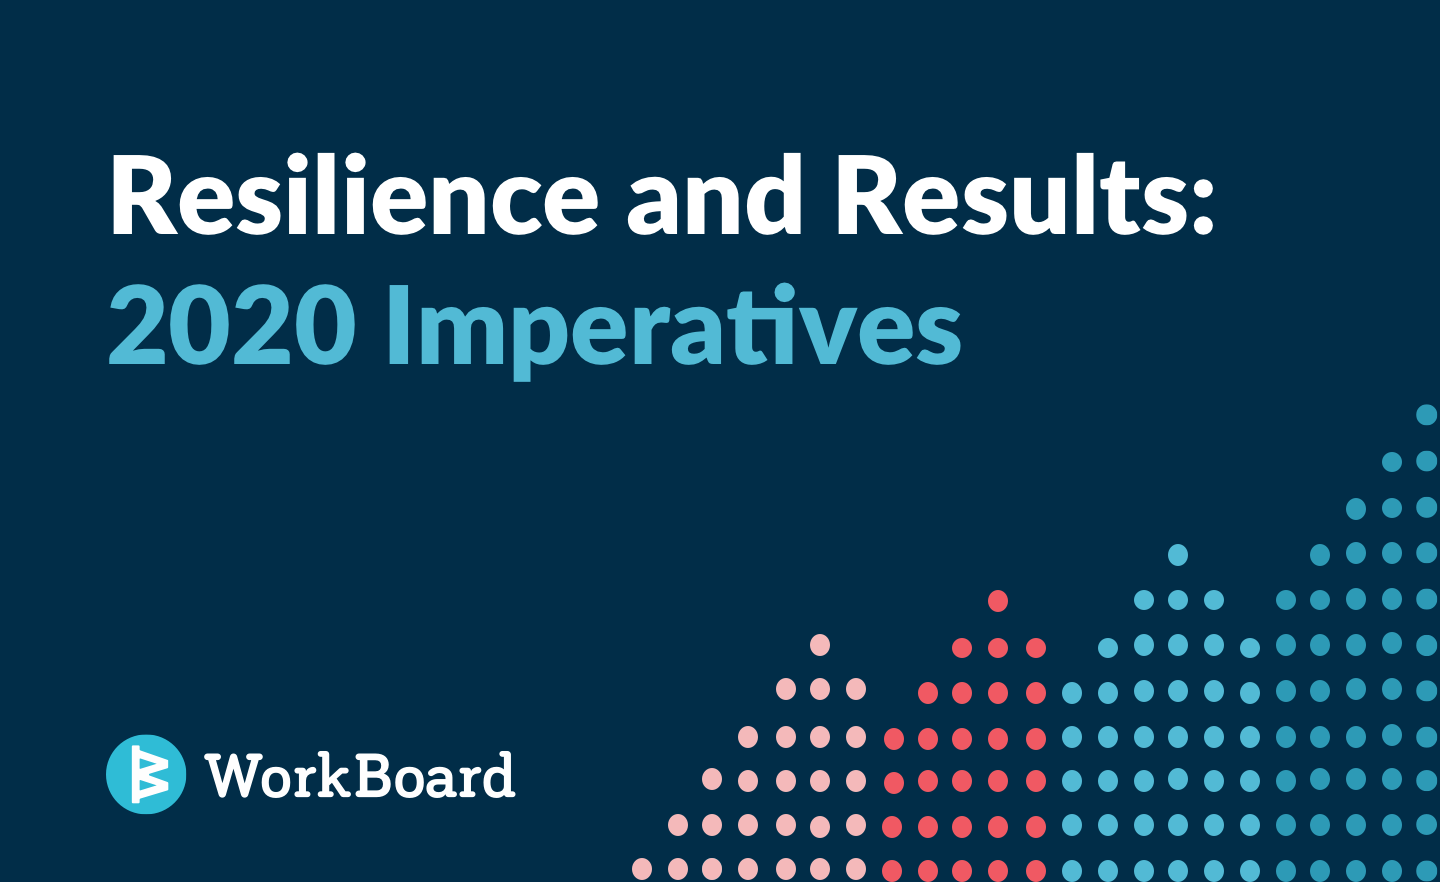 Blog Post: Resilience and Results: 2020 Imperatives